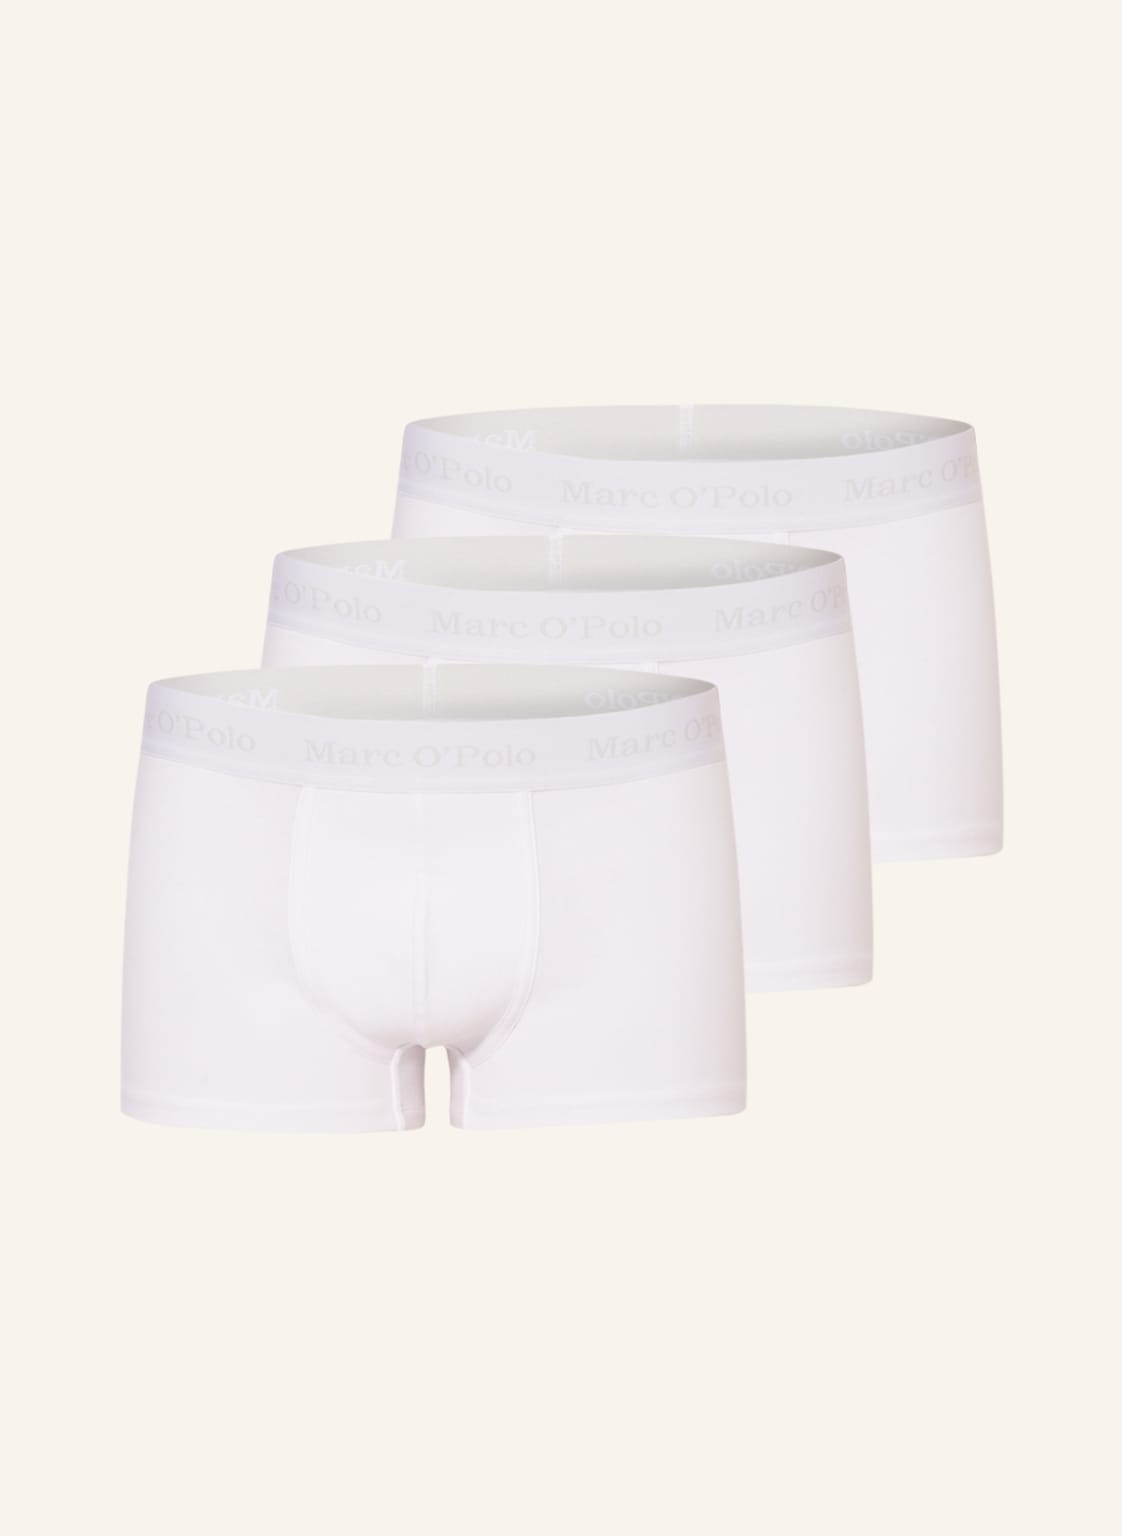 Marc O'polo 3er-Pack Boxershorts weiss von Marc O'Polo